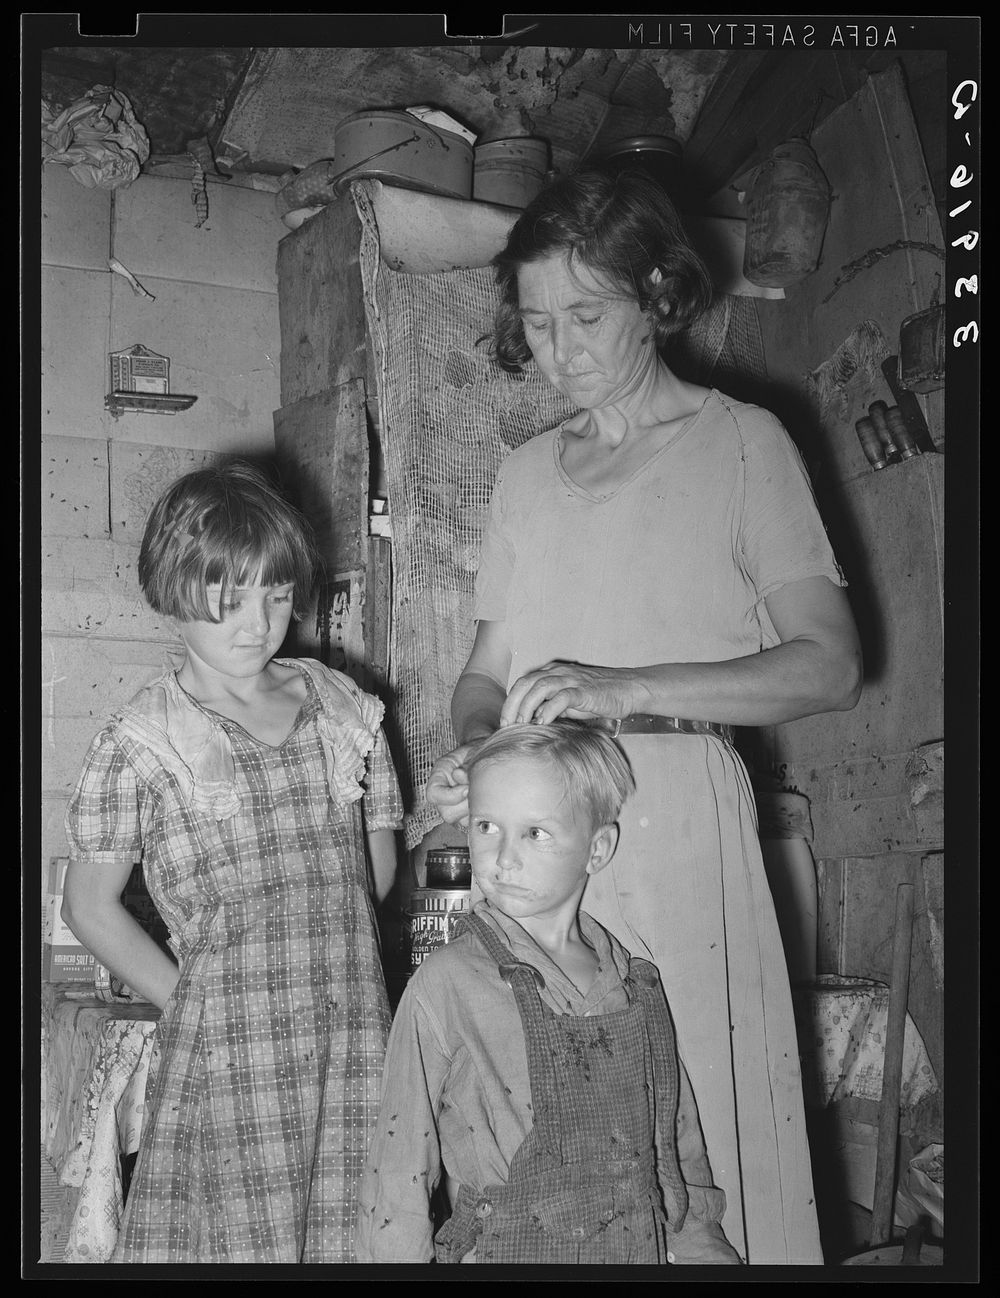 Woman in shack home in community camp. Oklahoma City, Oklahoma. Straightening her son's hair. Refer general caption no. 21…